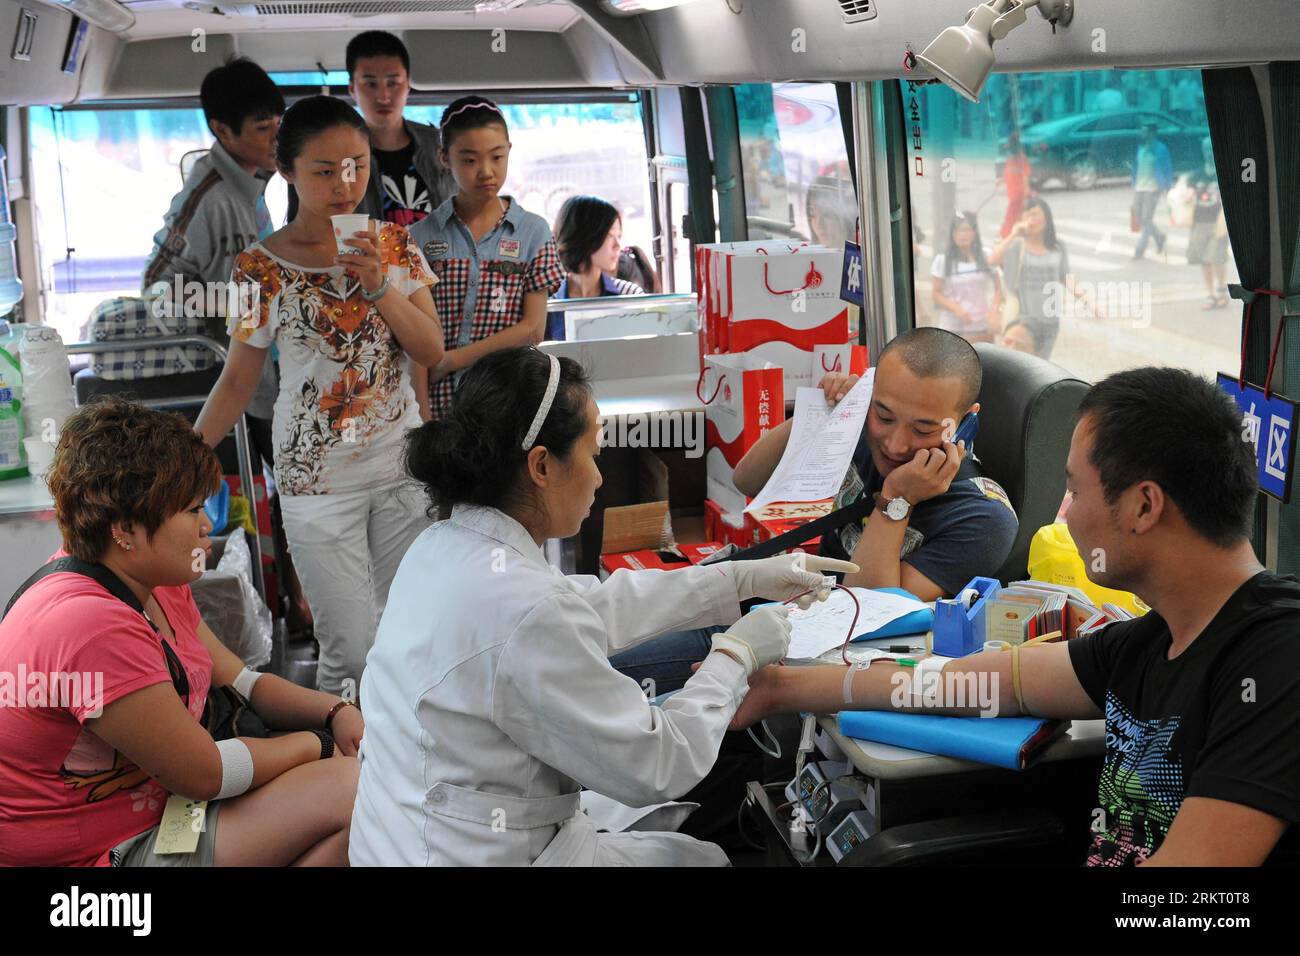 Bildnummer: 58340929  Datum: 13.08.2012  Copyright: imago/Xinhua (120813) -- TAIYUAN, Aug. 13, 2012 (Xinhua) -- donate blood on a blood donation vehicle in Taiyuan, capital of north China s Shanxi Province, Aug. 13, 2012. Many in Taiyuan donated their blood to back up reducing blood reserve in hospitals recently. (Xinhua/Fan Minda)(mcg) CHINA-TAIYUAN-BLOOD DONATION (CN) PUBLICATIONxNOTxINxCHN Gesellschaft Blutspende Blutspenden Blut Spenden xjh x0x 2012 quer      58340929 Date 13 08 2012 Copyright Imago XINHUA  Taiyuan Aug 13 2012 XINHUA Donate Blood ON a Blood Donation Vehicle in Taiyuan Capi Stock Photo